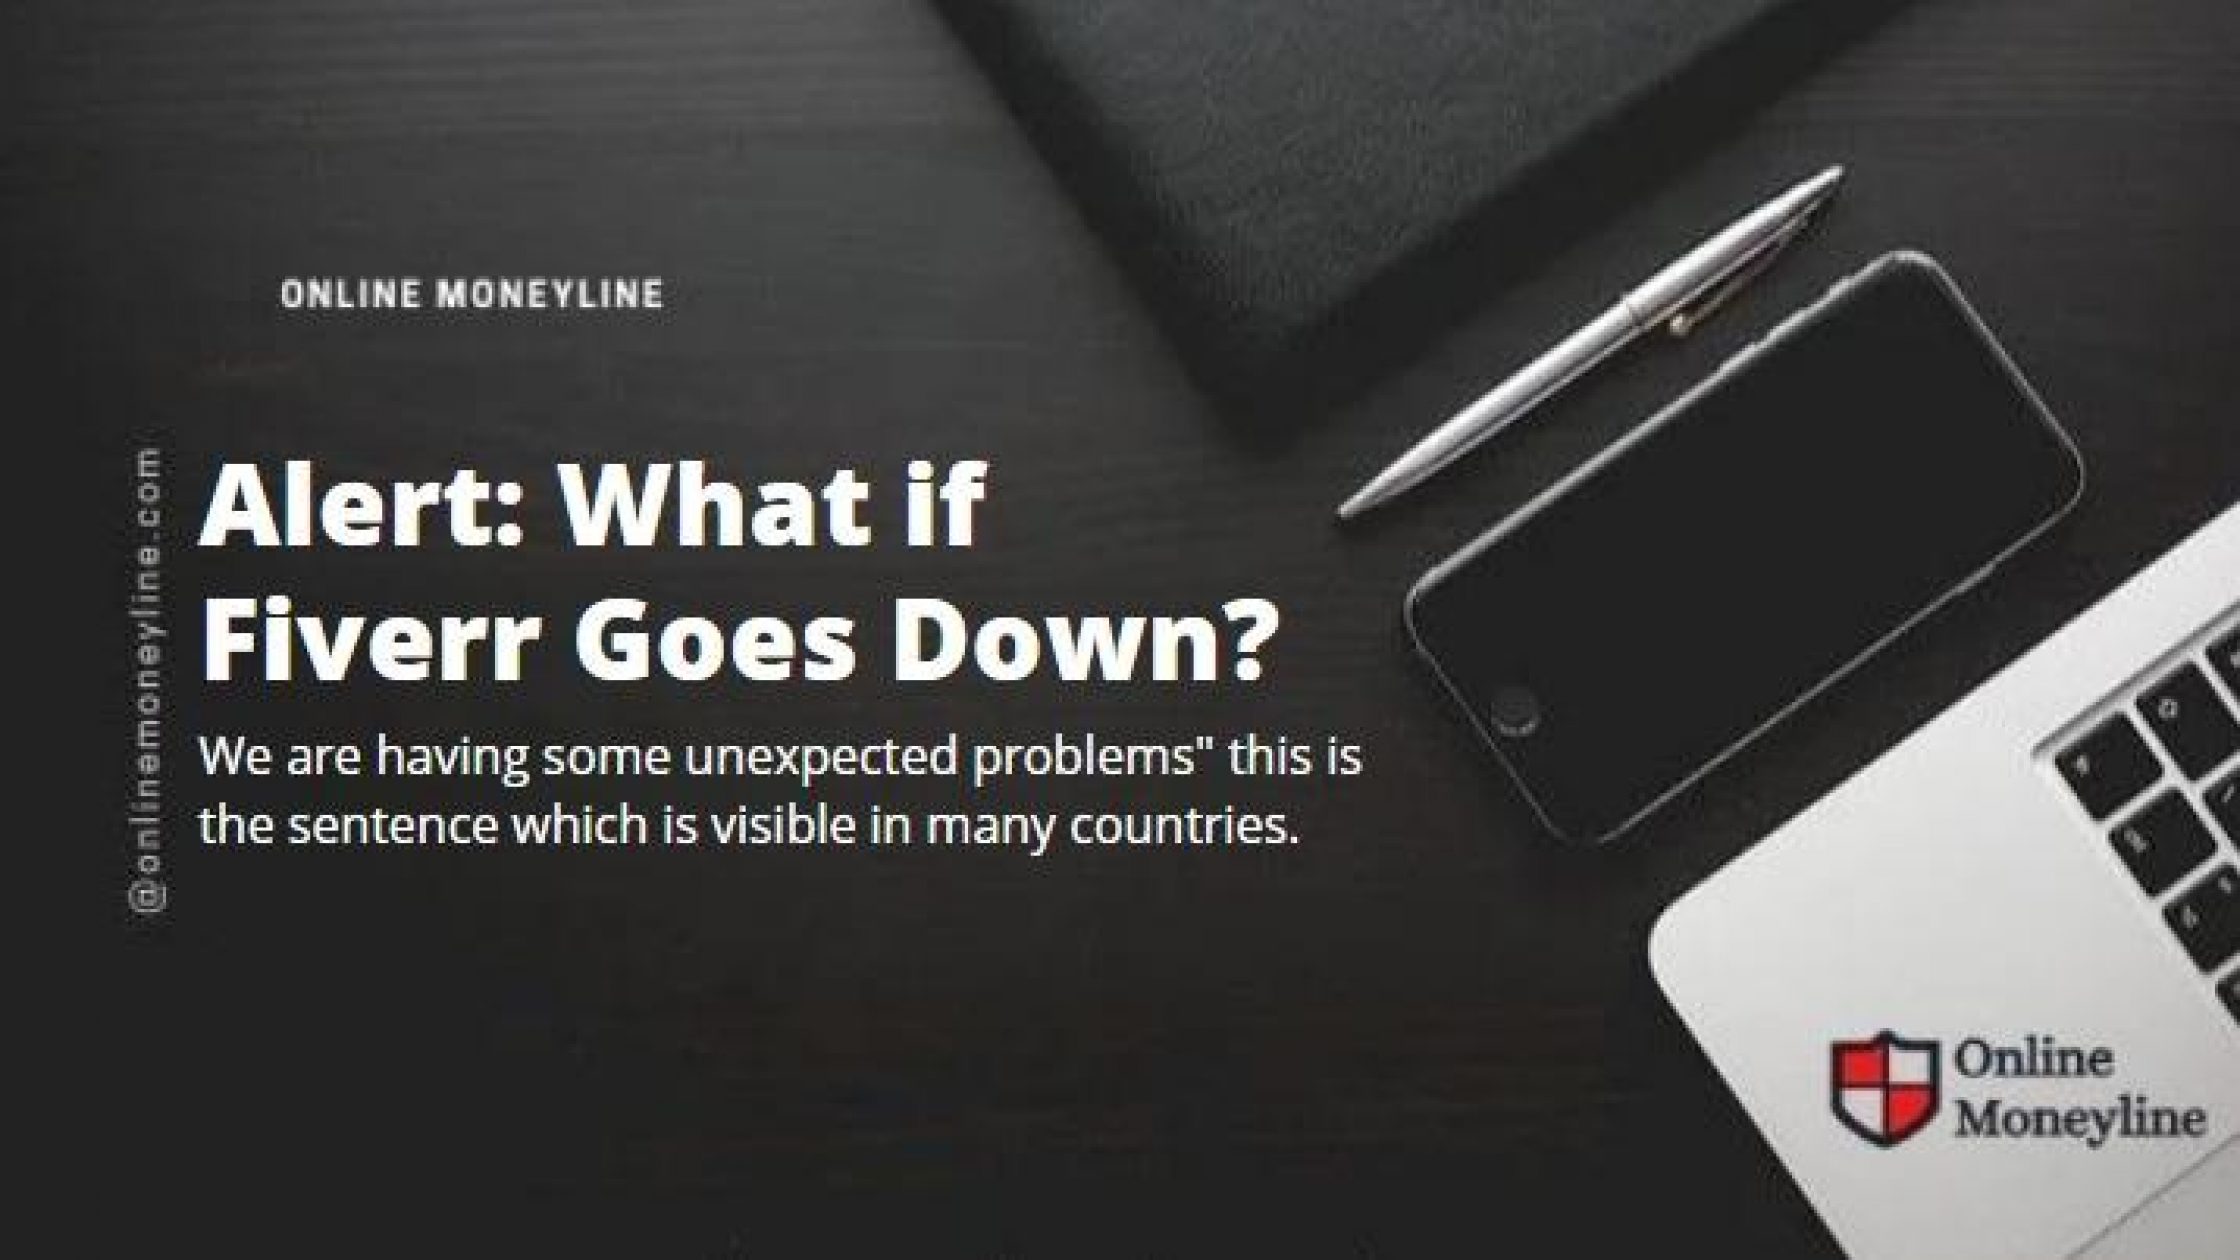 Alert: What if Fiverr Goes Down?